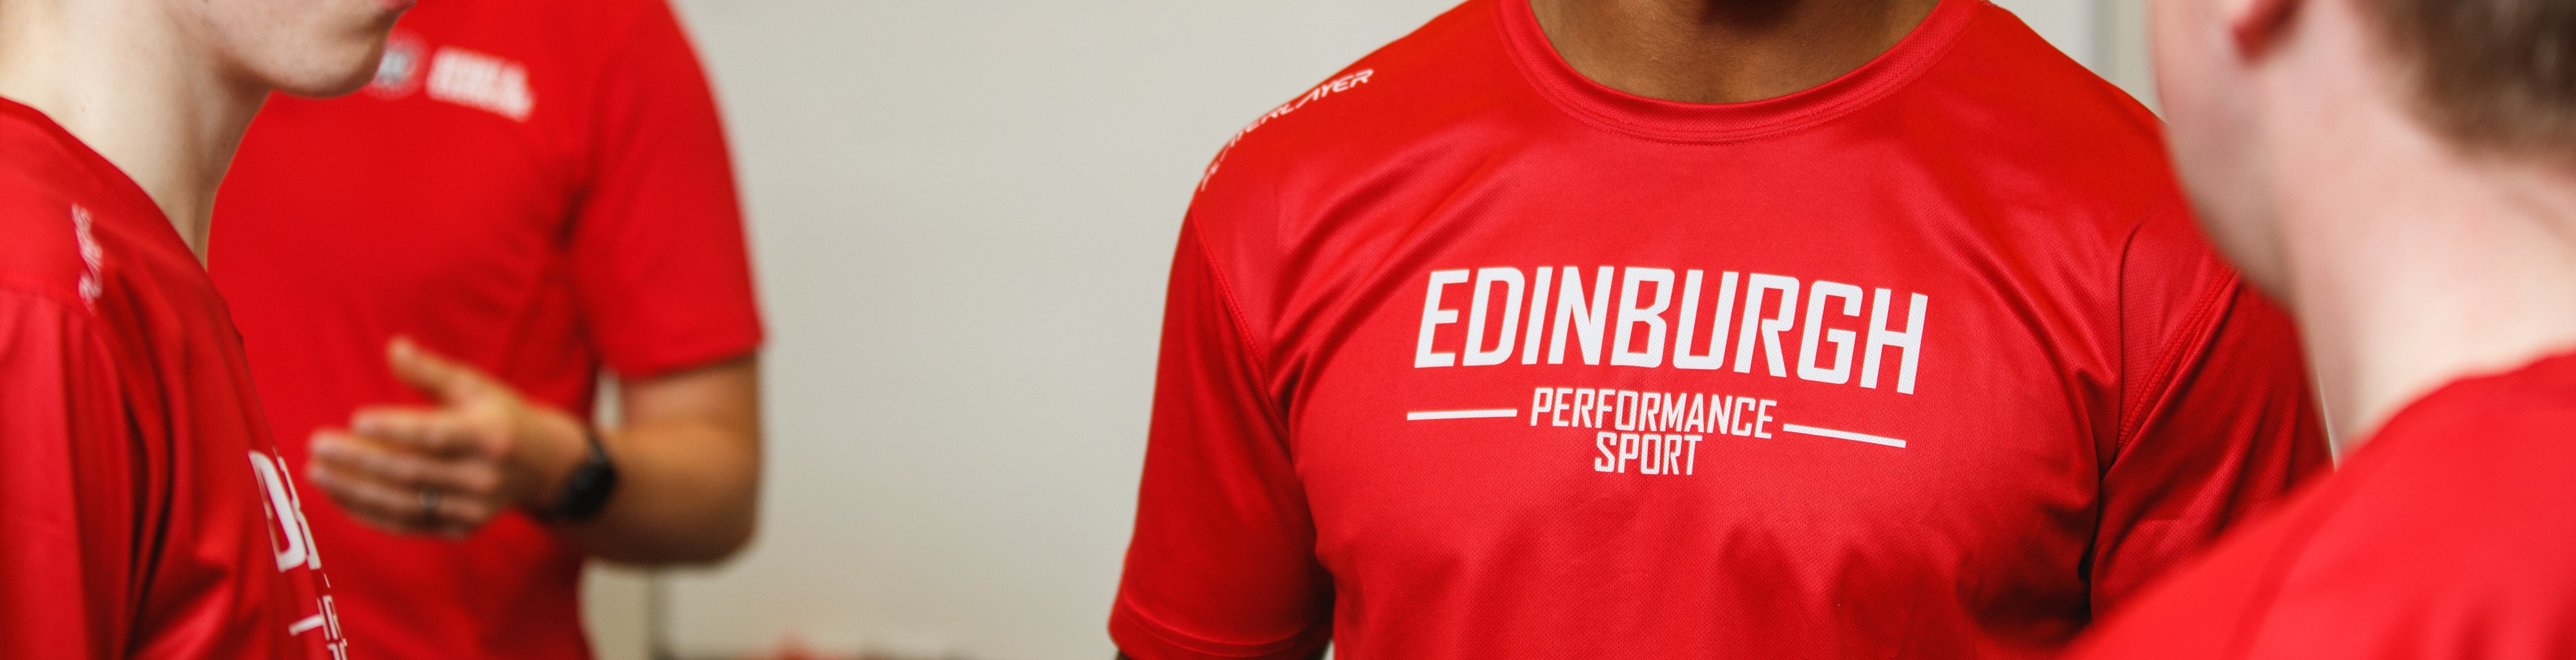 Image of red performance sport shirt